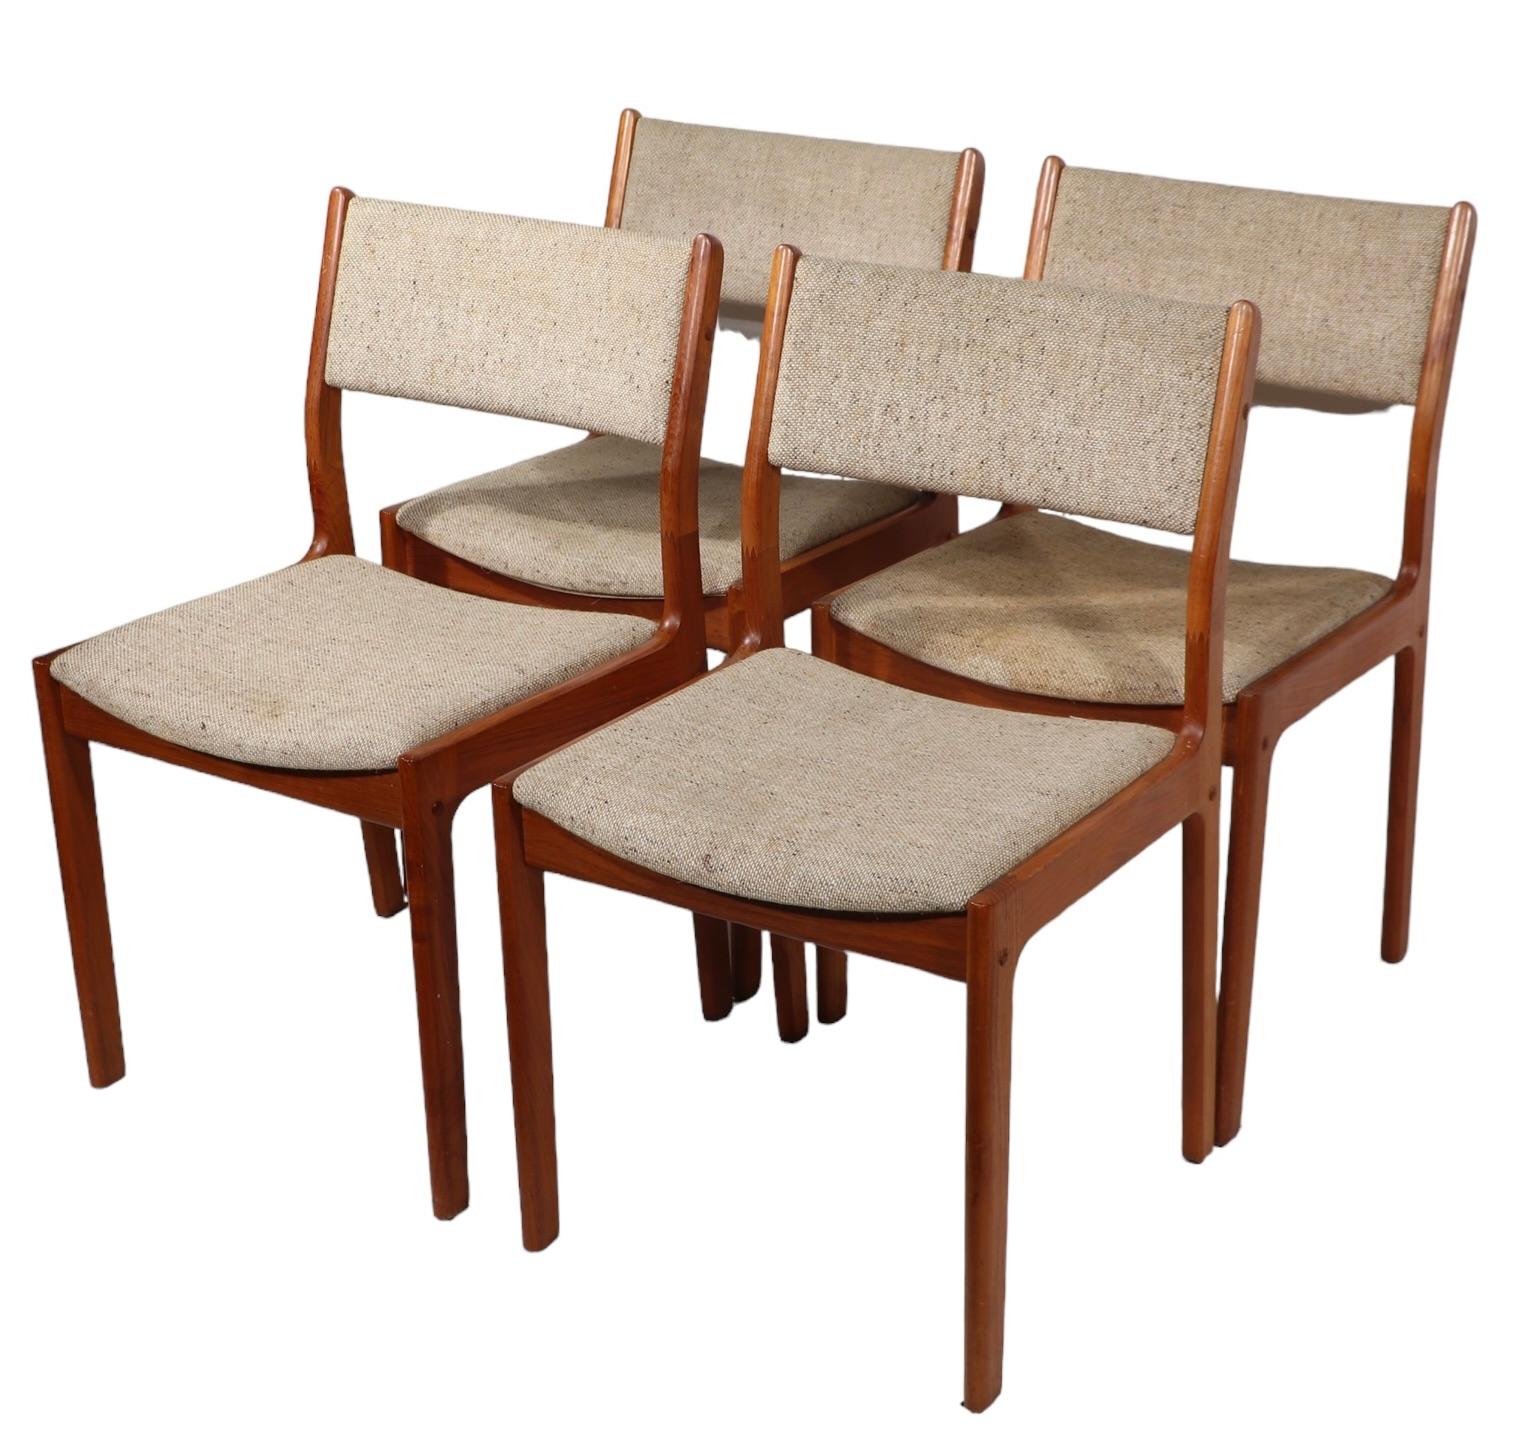 Four Teak  Danish Style Mid Century Dining Chairs by D Scan c 1950/1960's  In Good Condition For Sale In New York, NY